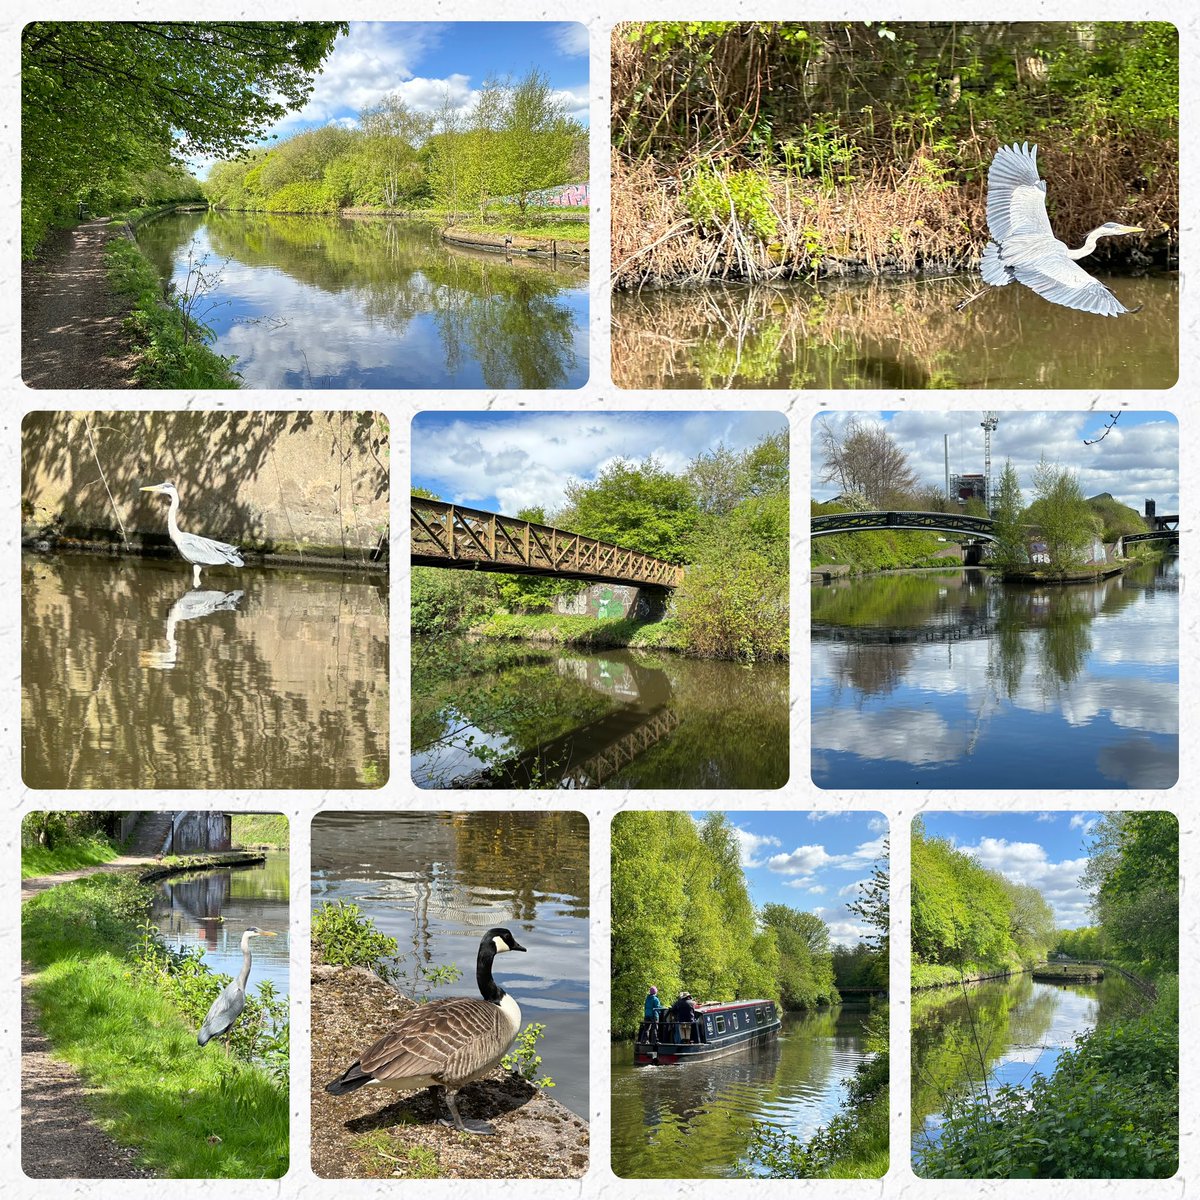 National cycle route 81, nearby Sandwell and Dudley Station ❤️❤️❤️